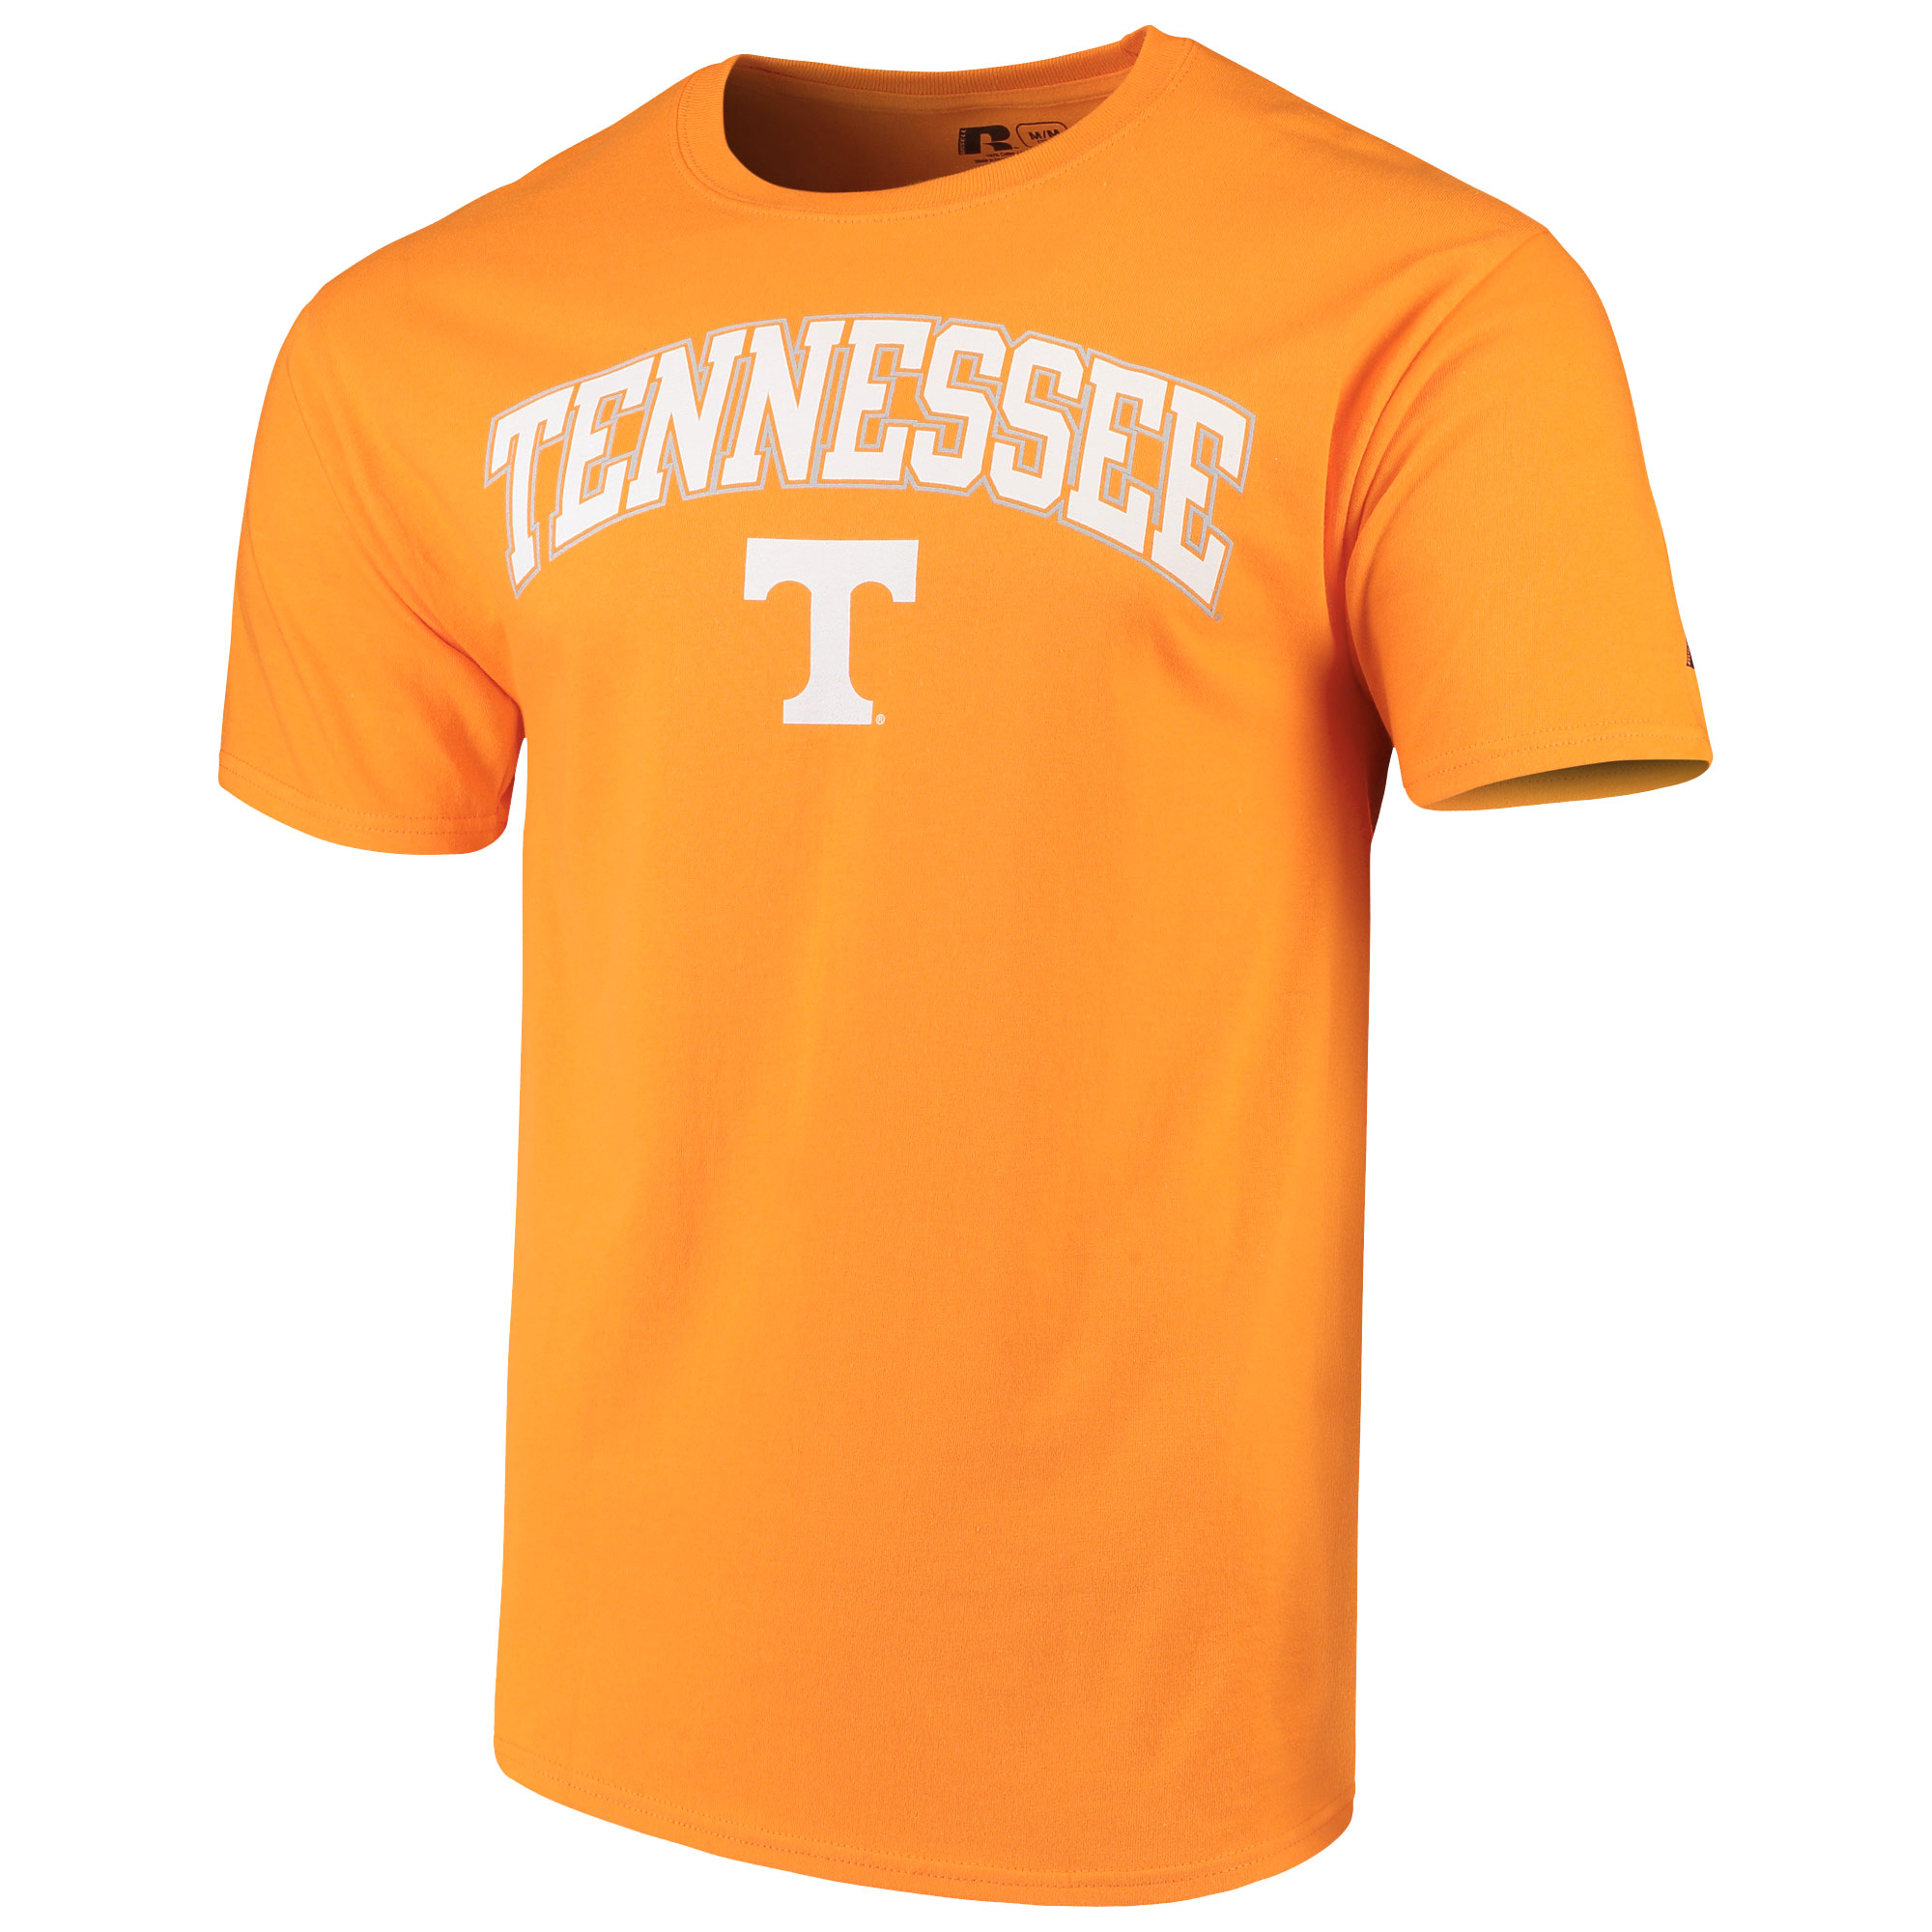 NCAA Tennessee Volunteers, Men's Classic Cotton T-Shirt - image 2 of 3